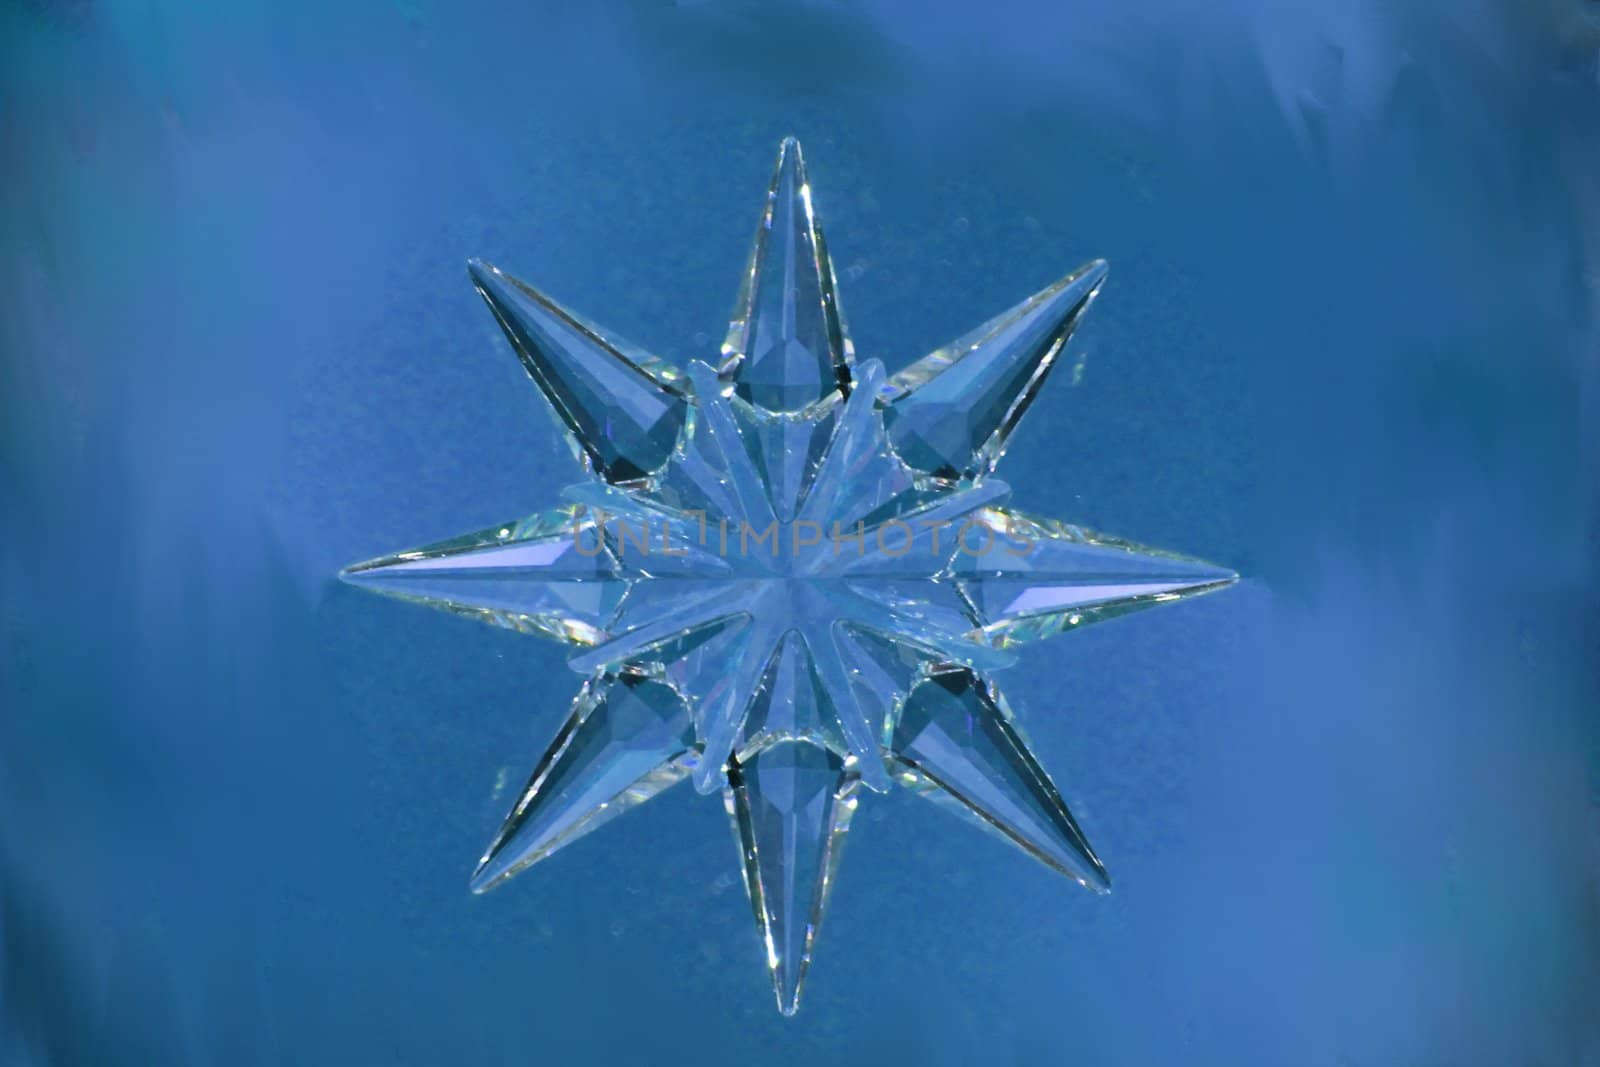 A Christmas ornament made of crystal in a star or snow flake shape with a blue, frost like background.